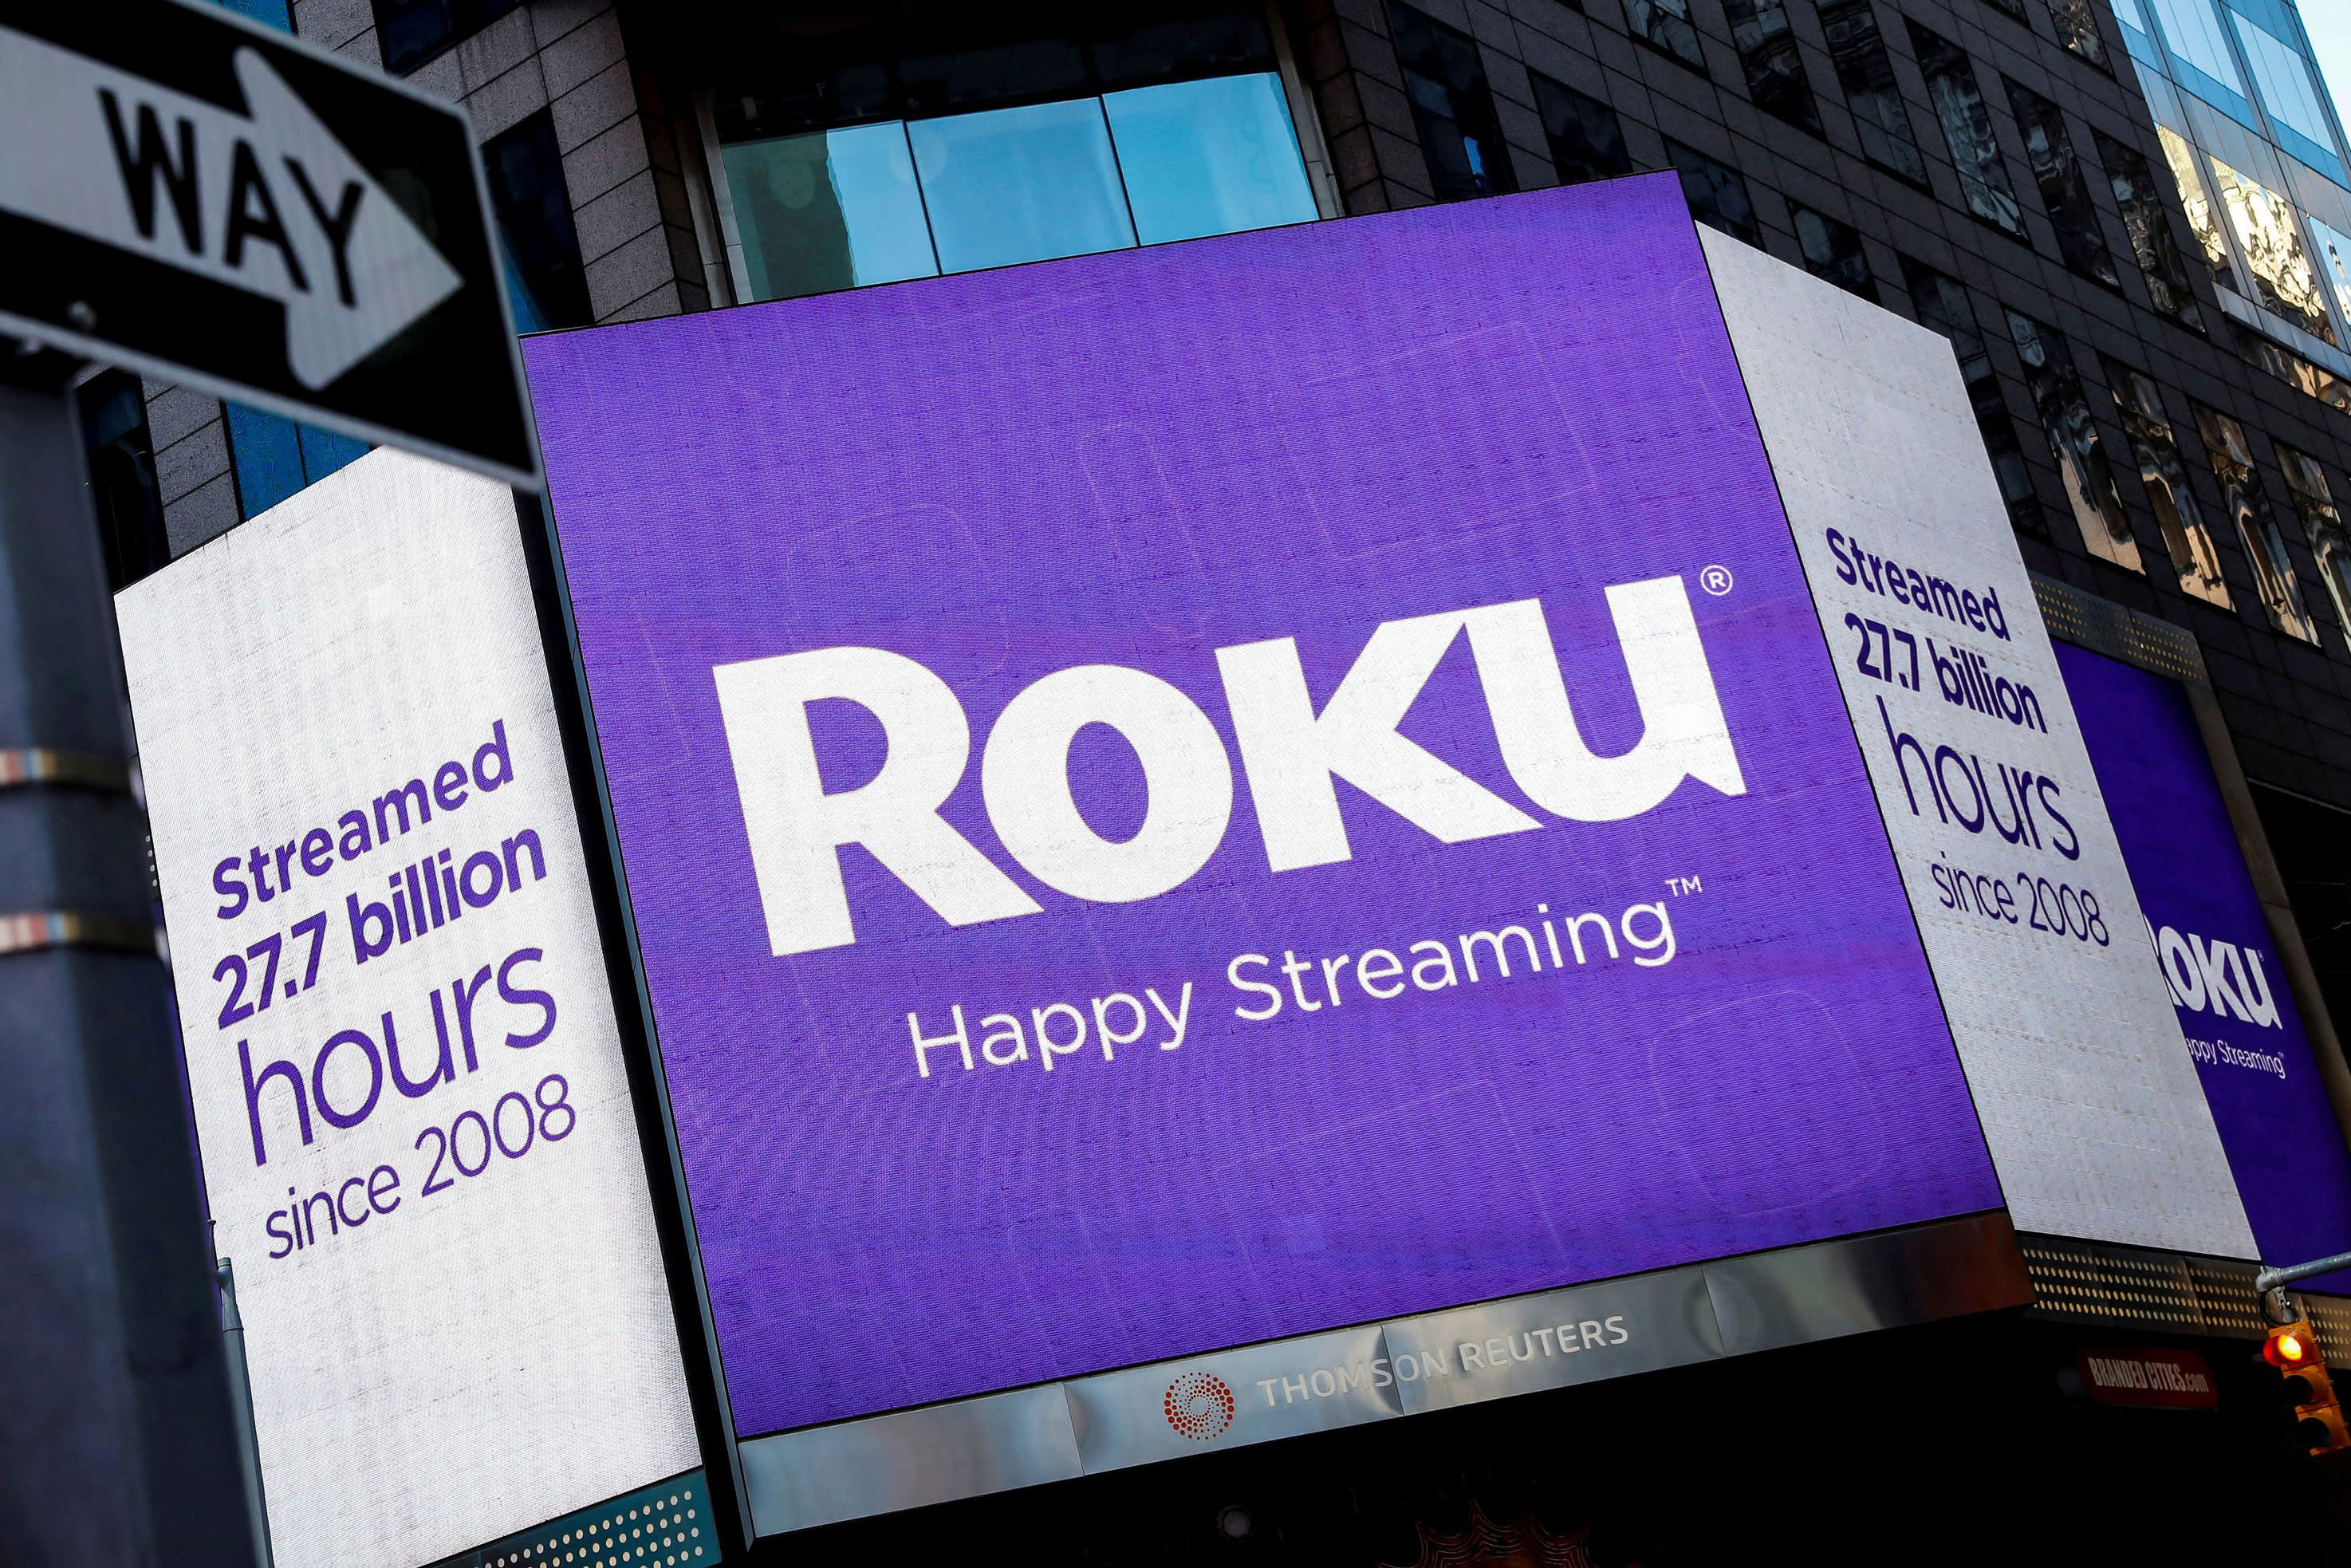 Why Some Analysts Are Still Worried About Roku Even After Reporting Strong Q4 Results